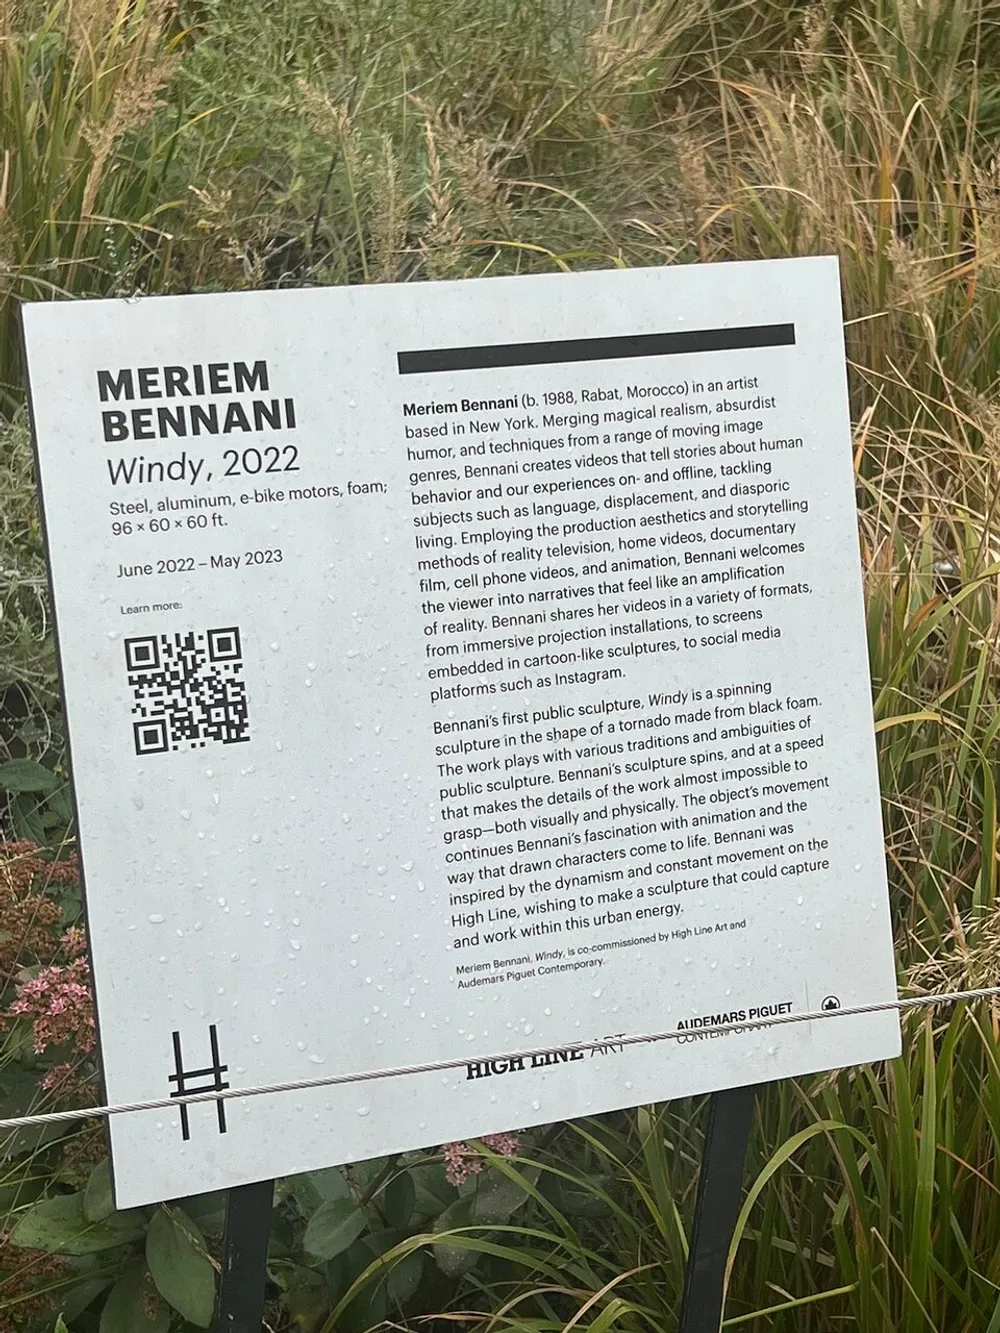 The image shows an information panel about an artwork titled Windy 2022 by Meriem Bennani mentioning the materials used and providing context about the artist and the work with a QR code and logos of the sponsoring organizations at the bottom